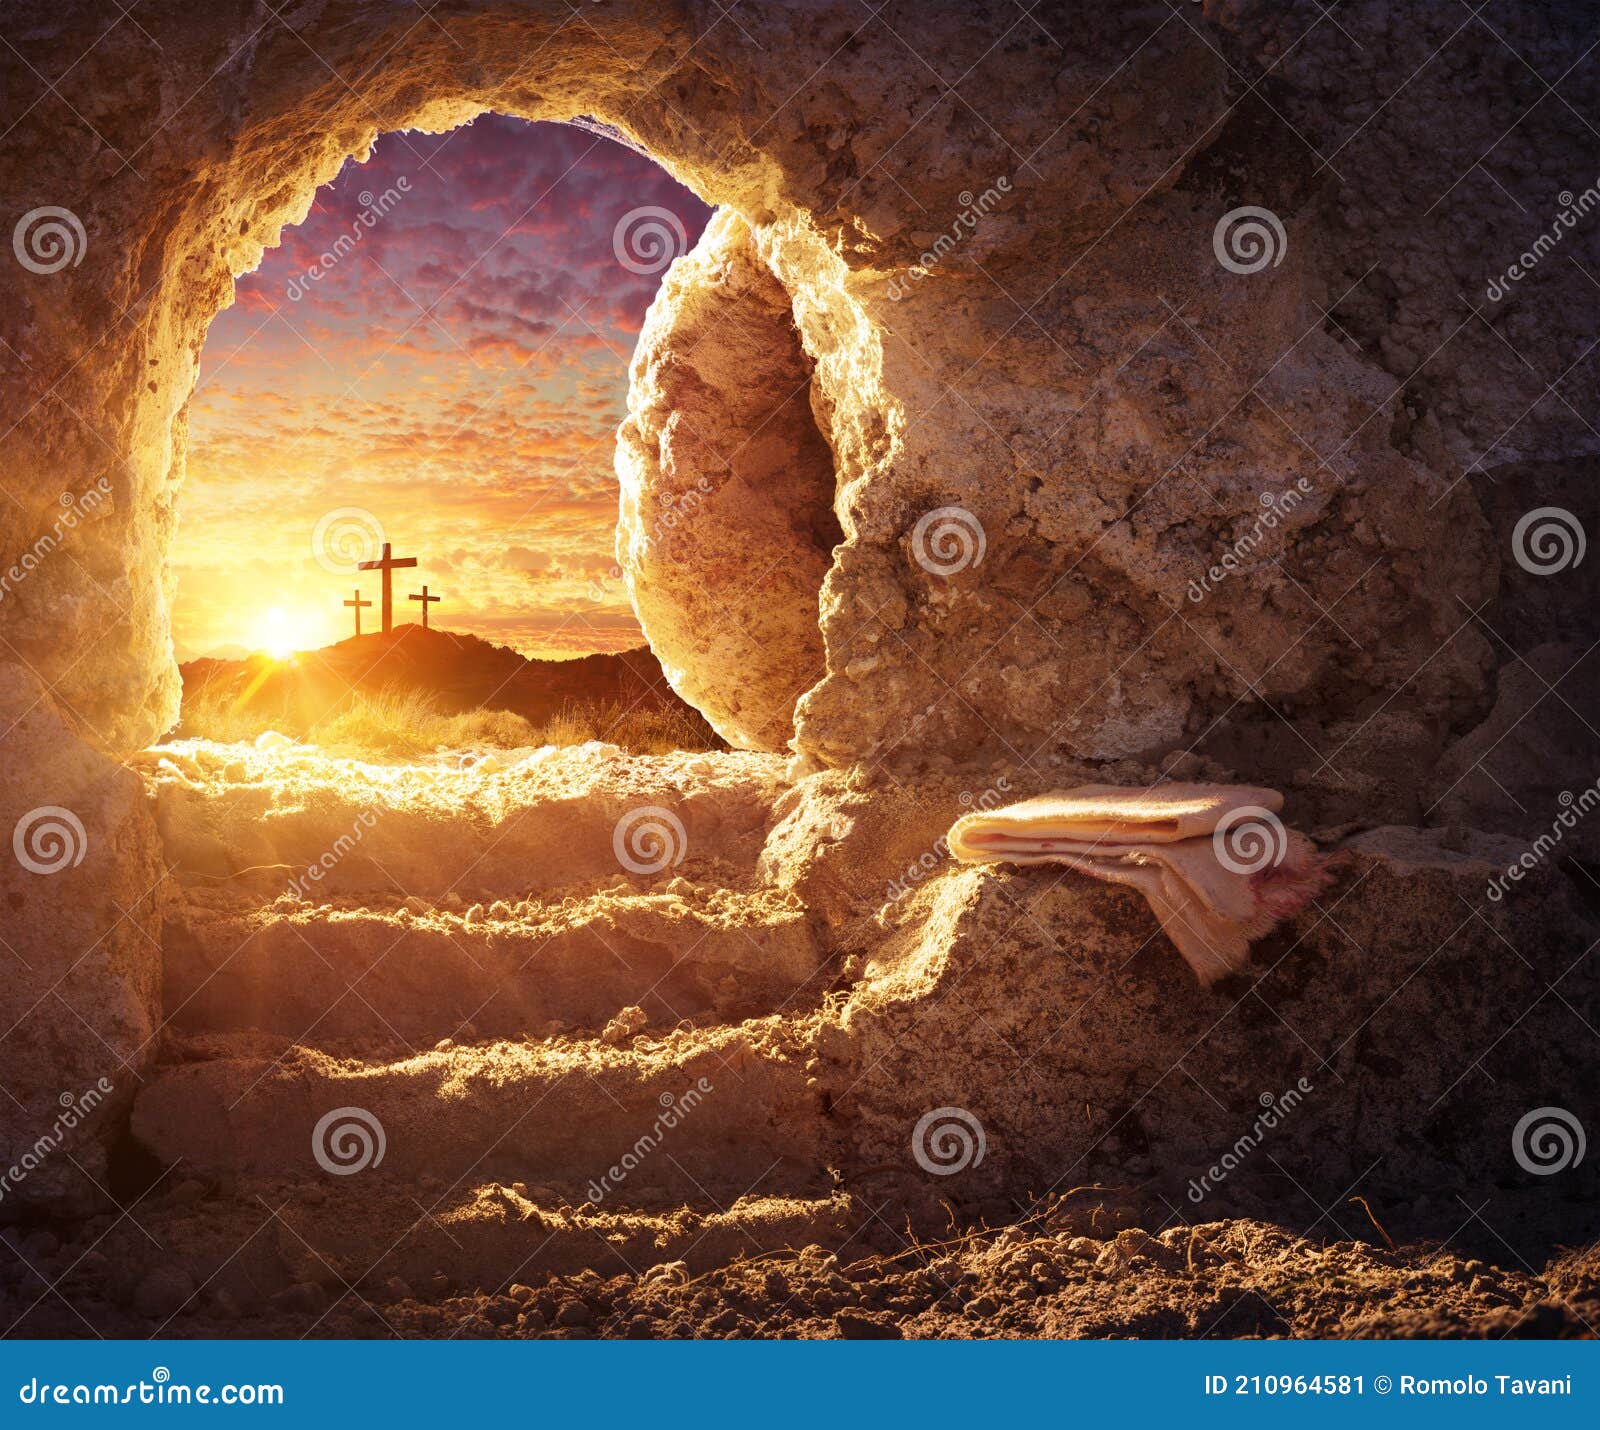 empty tomb with crucifixion at sunrise